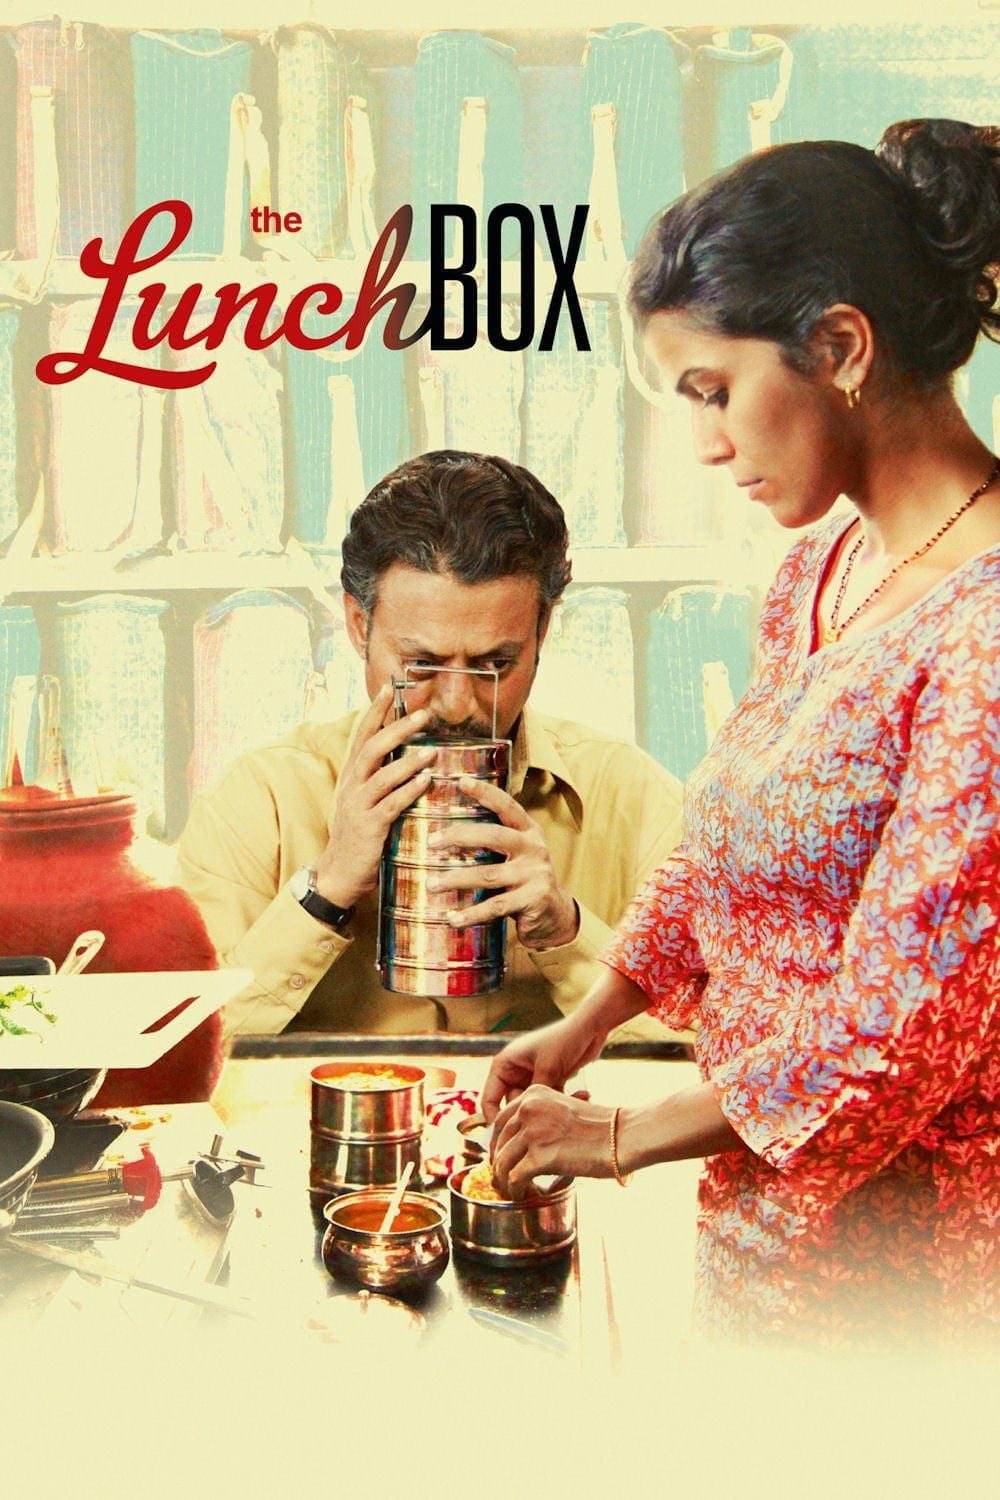 Poster for the movie "The Lunchbox"